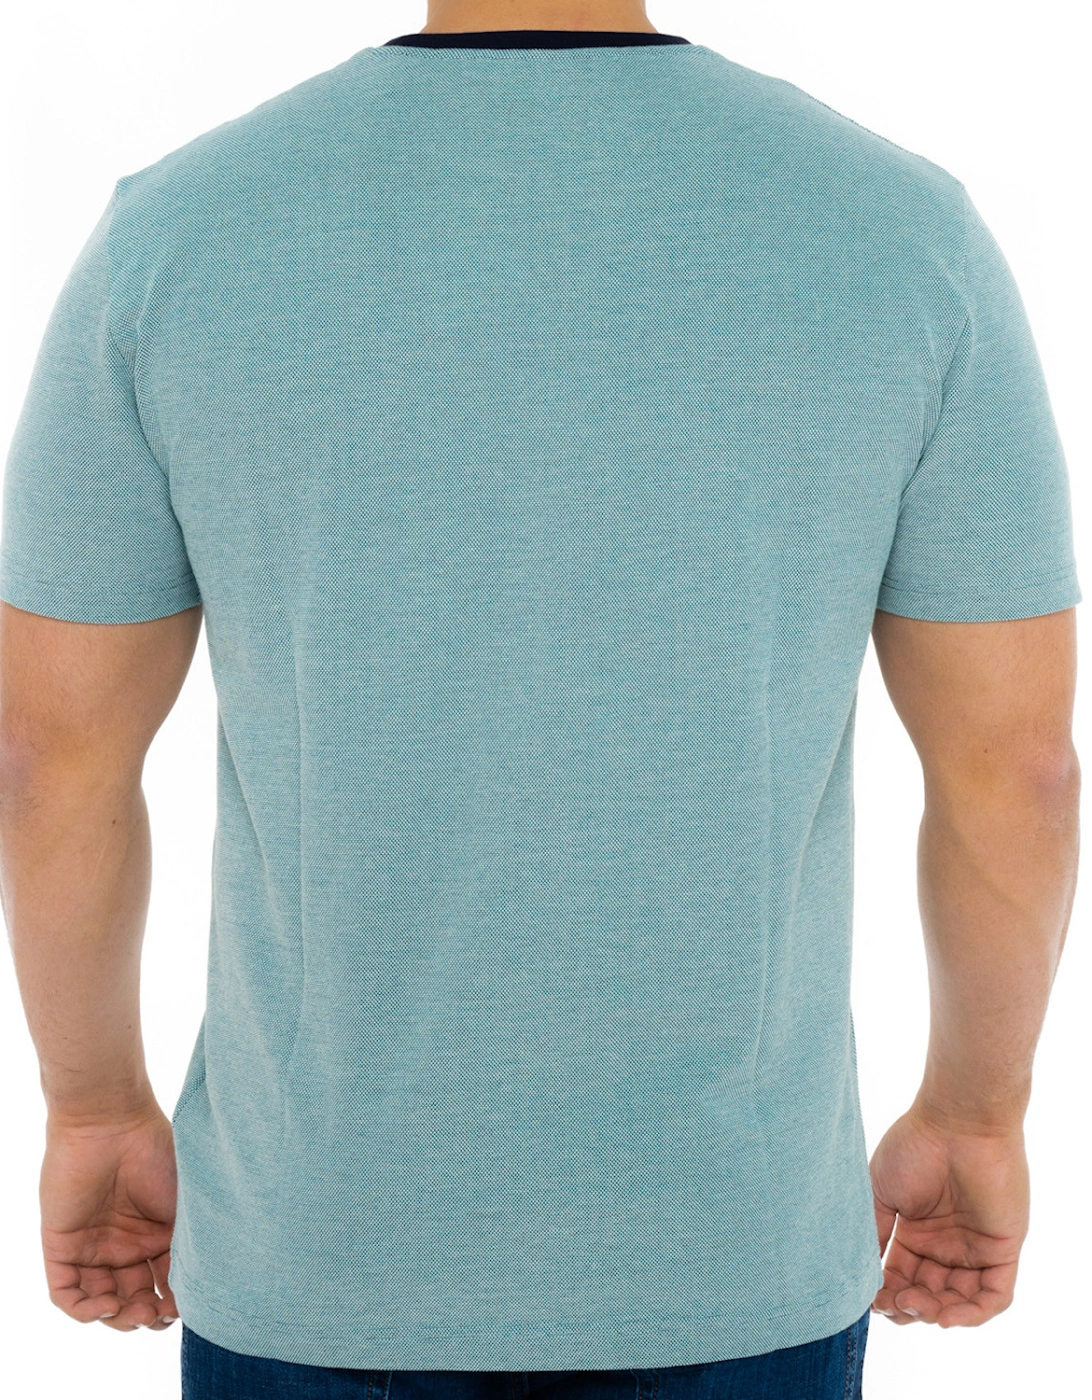 Mens 4-Col Oxford T-Shirt (Turquoise)